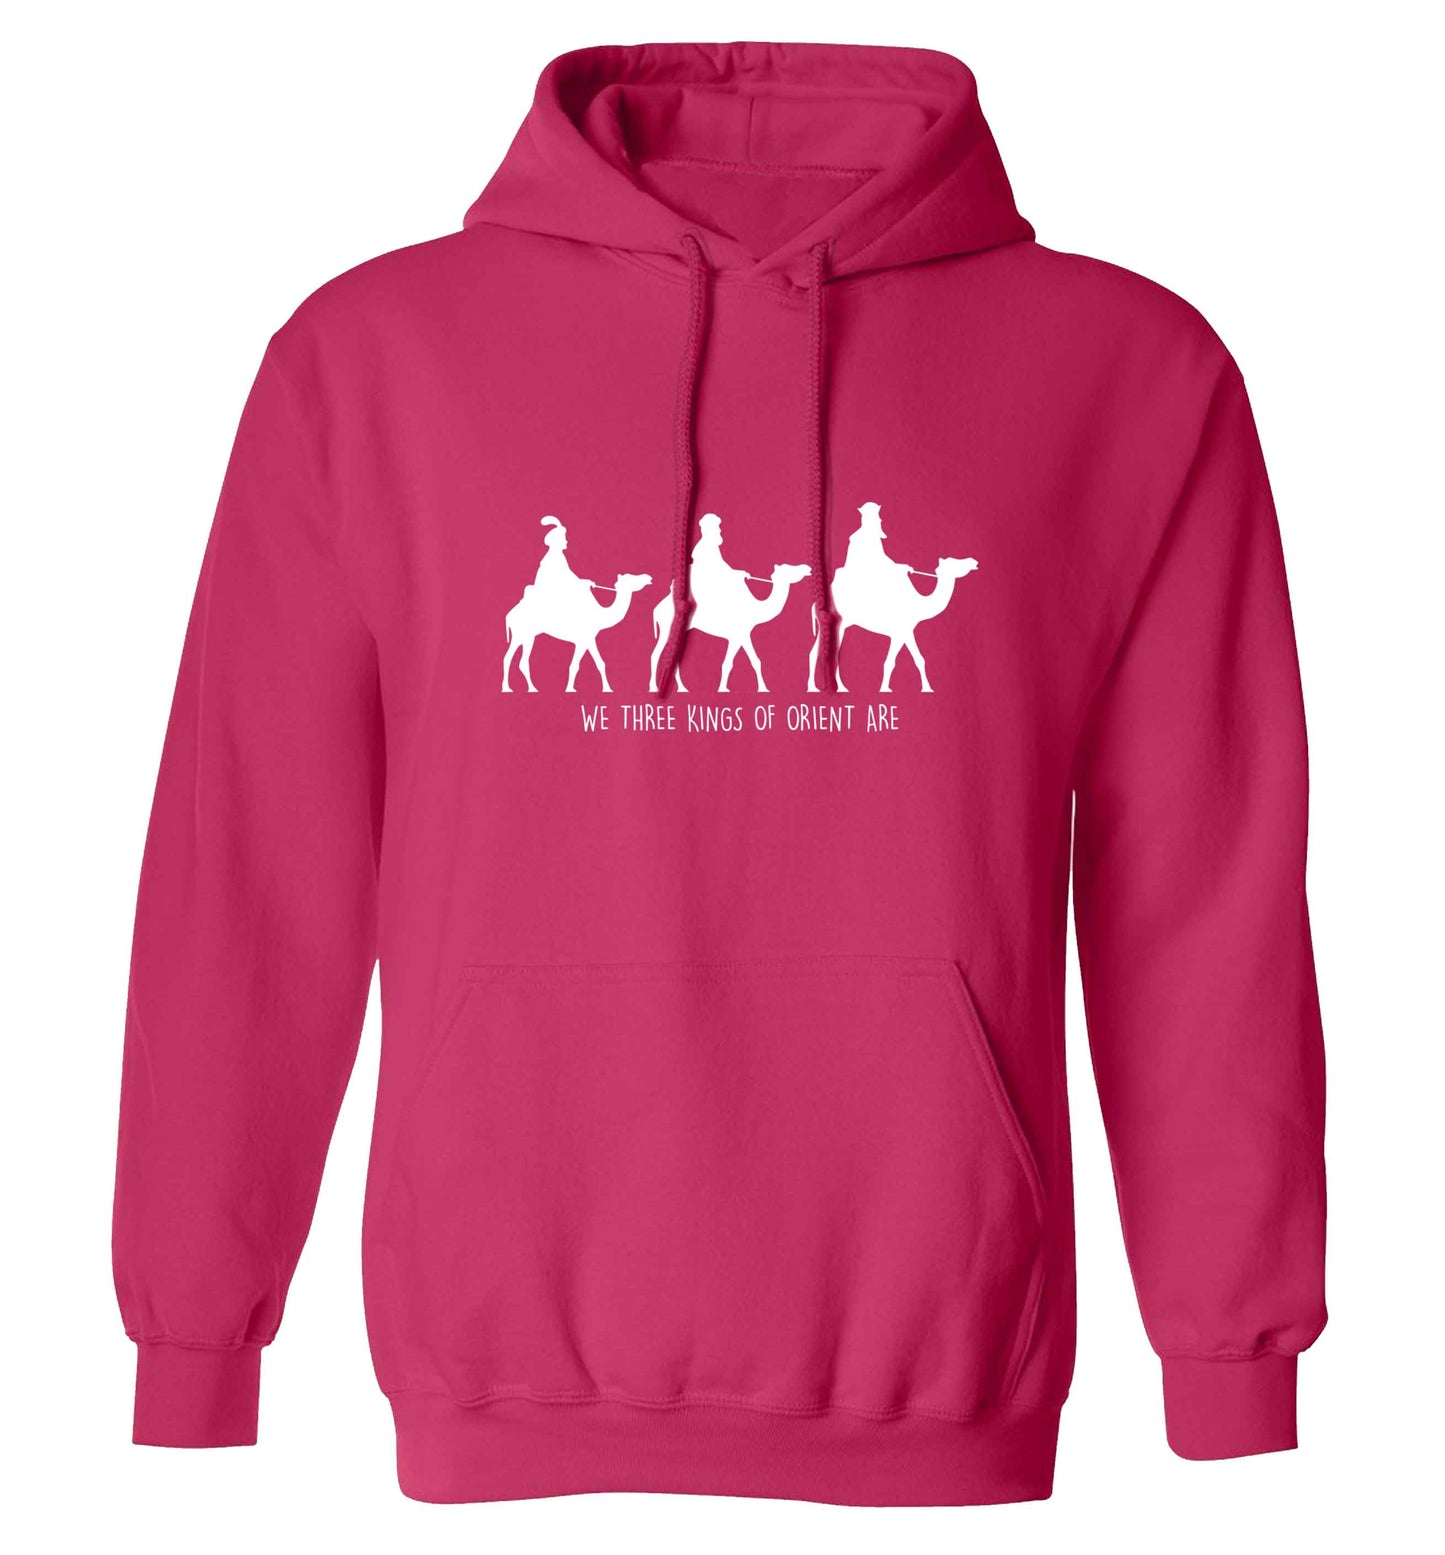 We three kings of orient are adults unisex pink hoodie 2XL